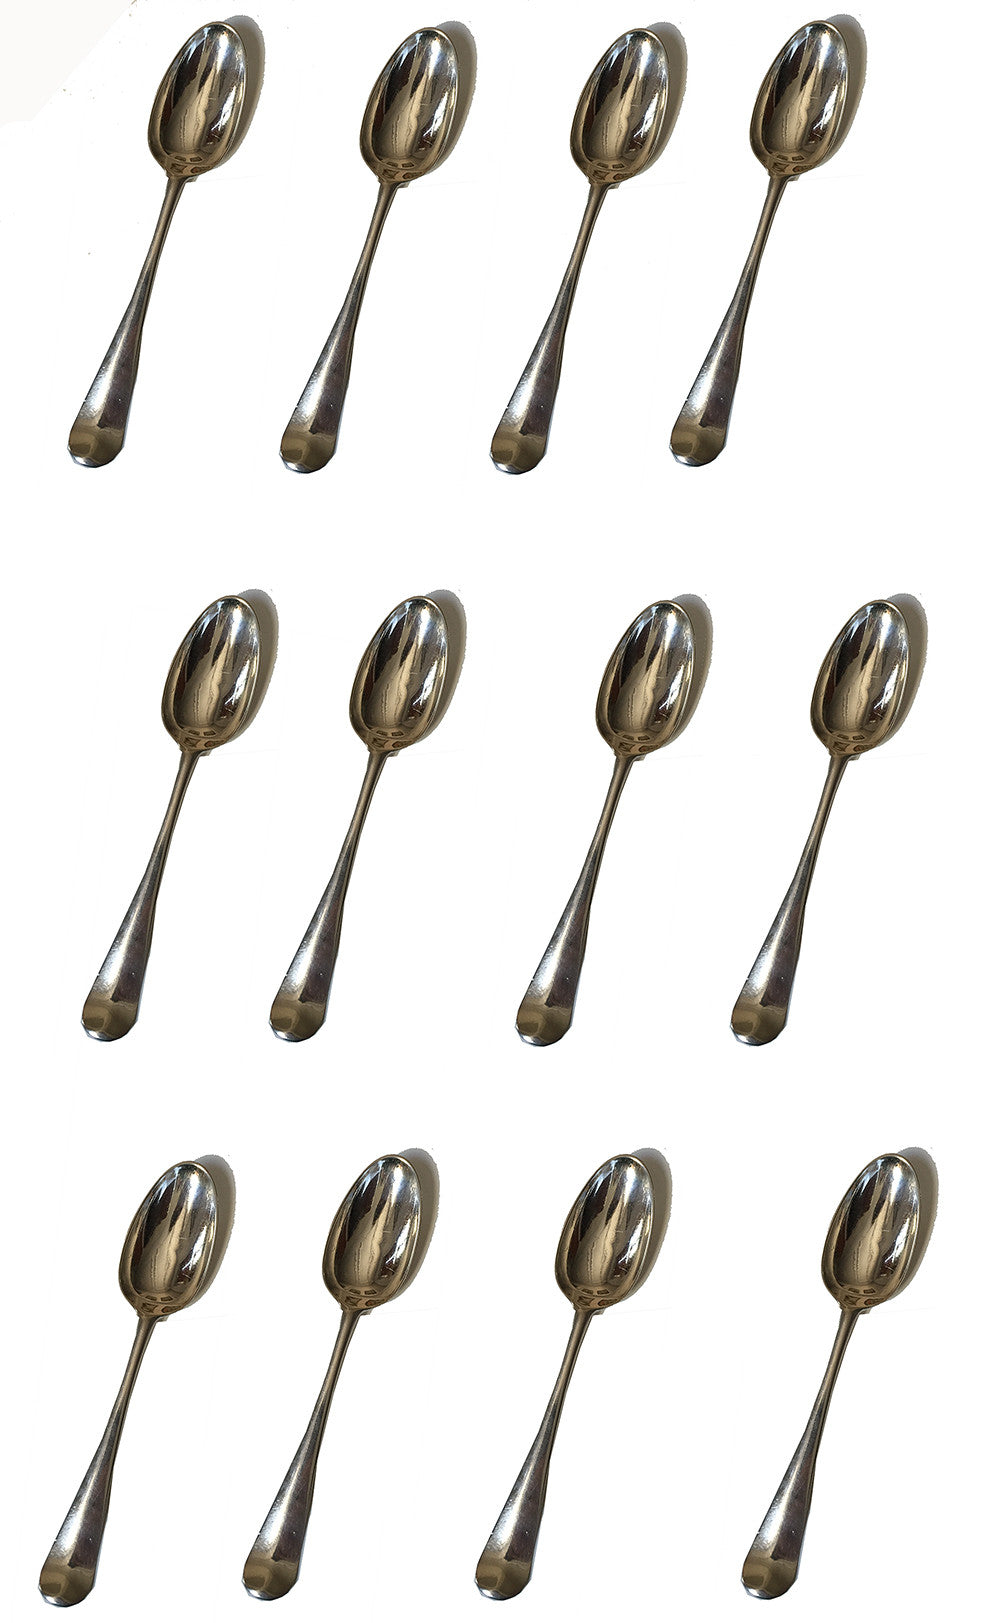 SOLD English George I Britannia Silver Dessert Spoons, by Isaac Davenport, London, 1719